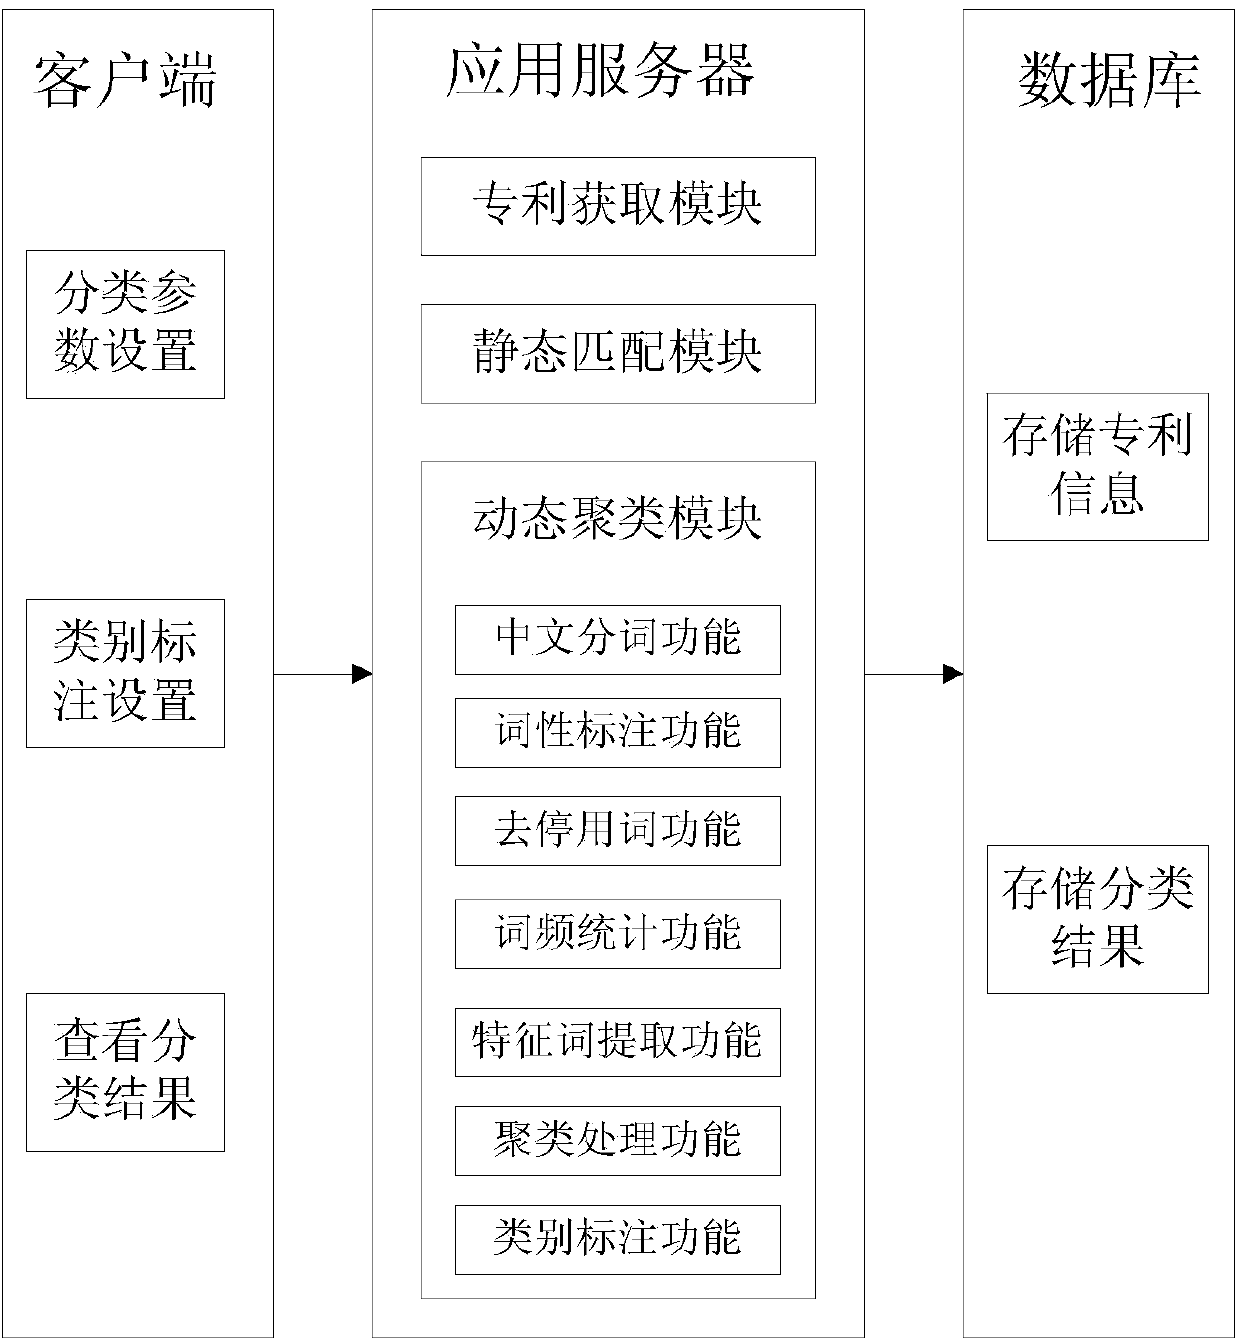 Chinese technology patent automatic classification system and method for patent classification by using system